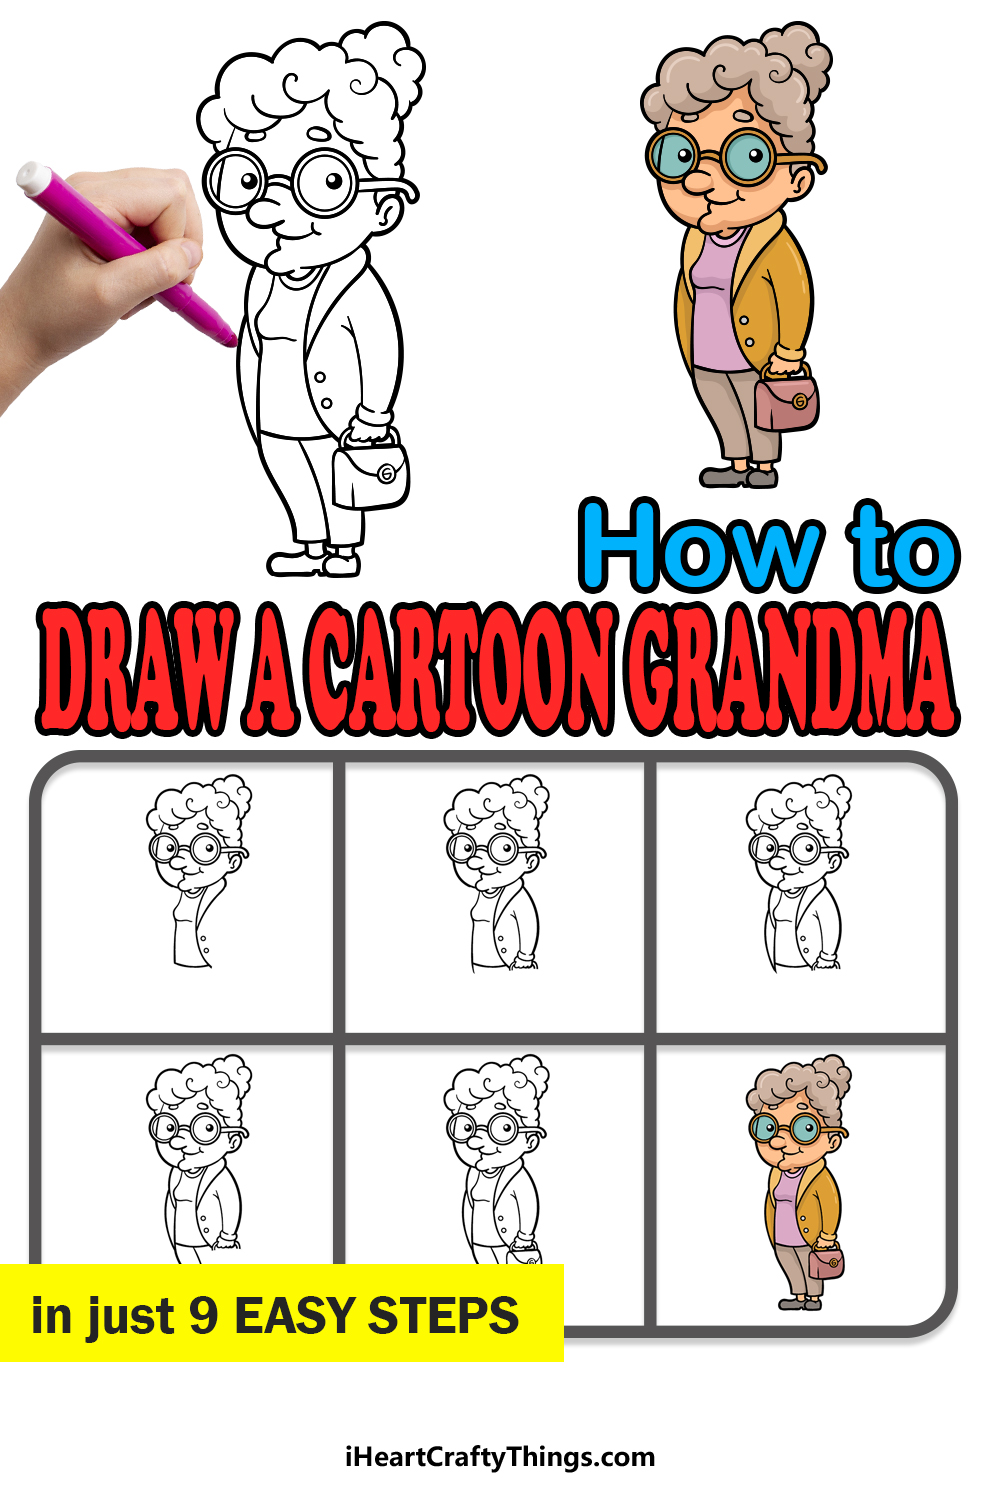 how to draw a cartoon grandma in 9 easy steps